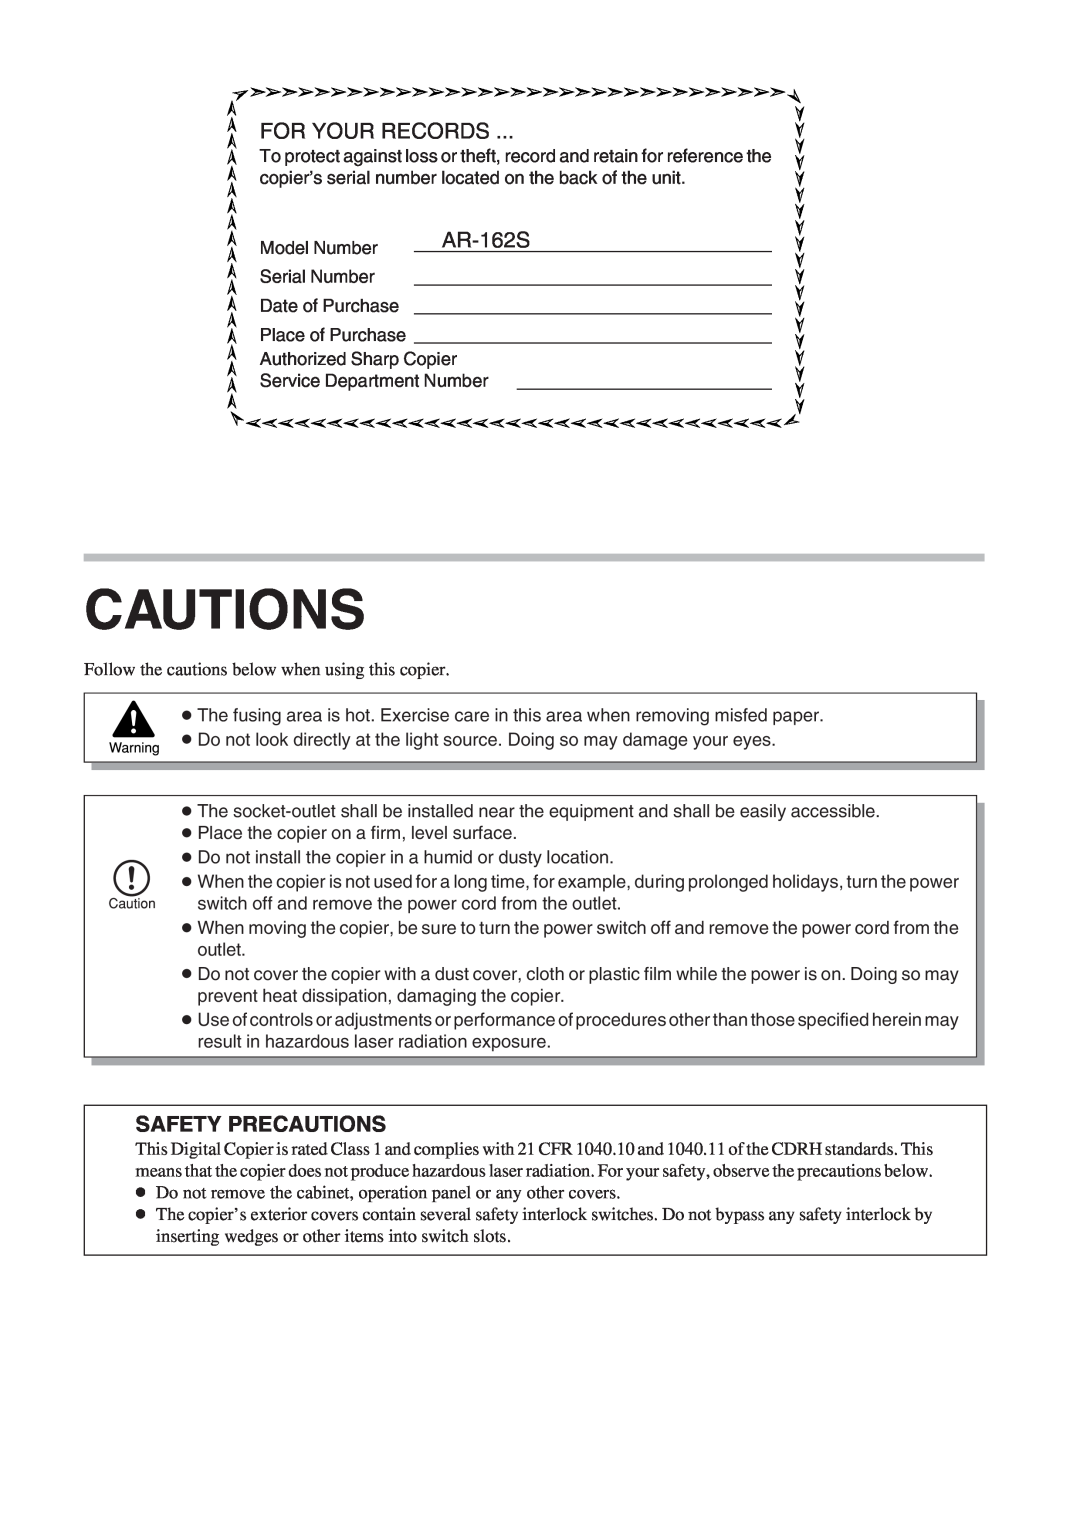 Sharp AR-162S operation manual Cautions, For Your Records, Safety Precautions 